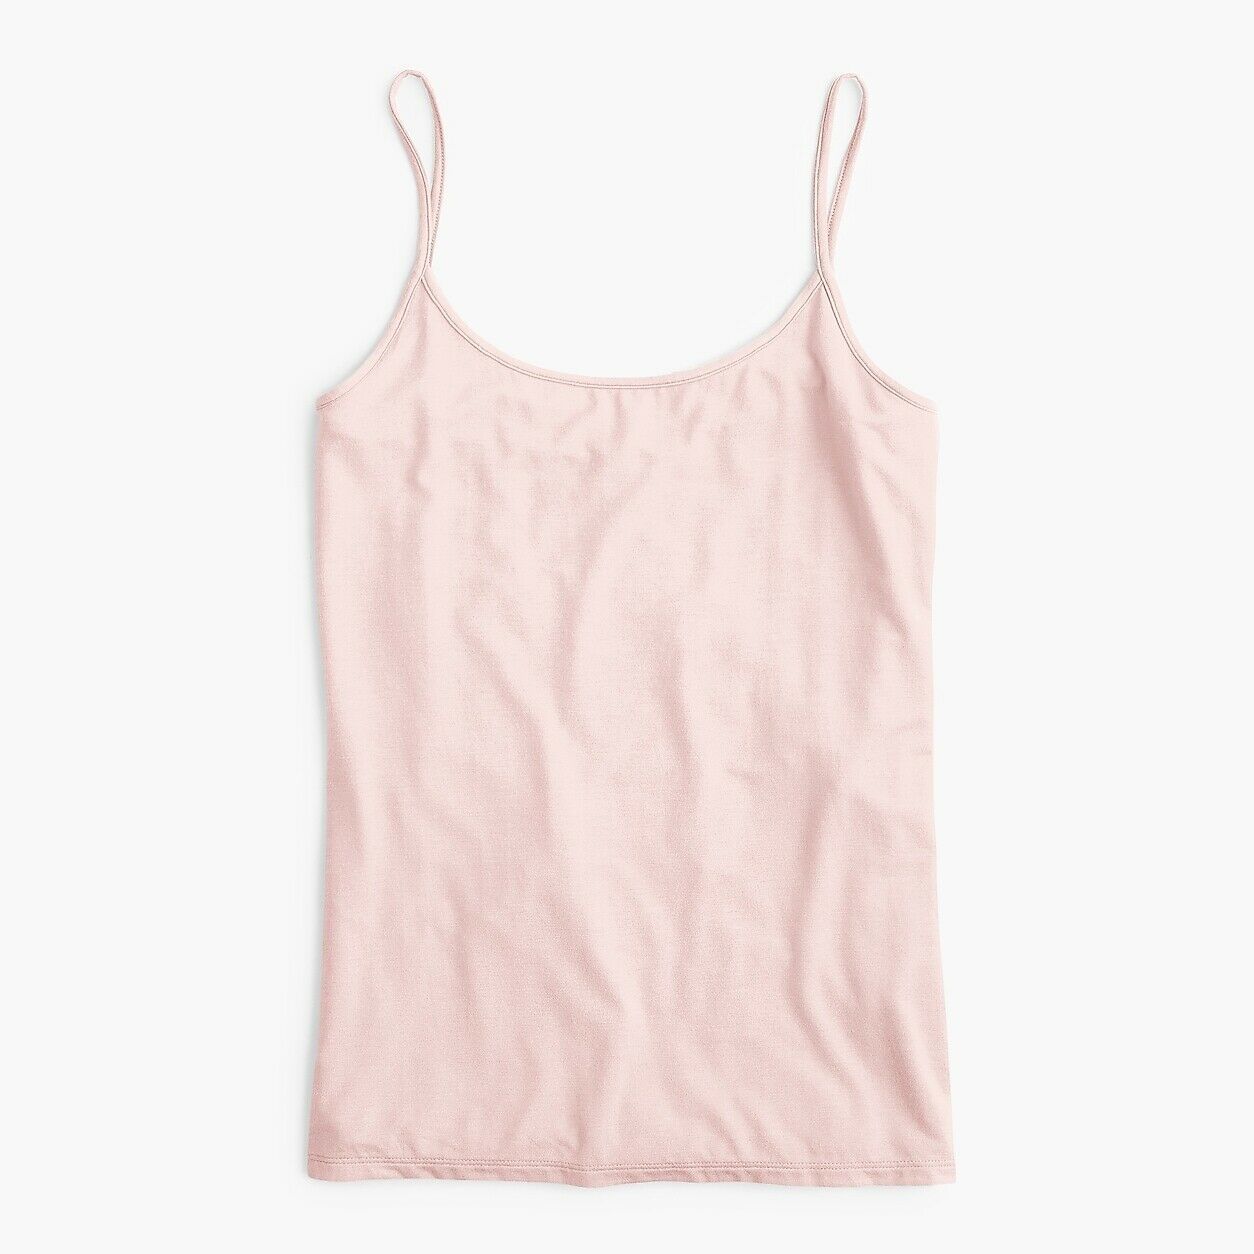 j crew camisole top new 365 subtle pink stretch camisole in soft tencel nwt xs-m